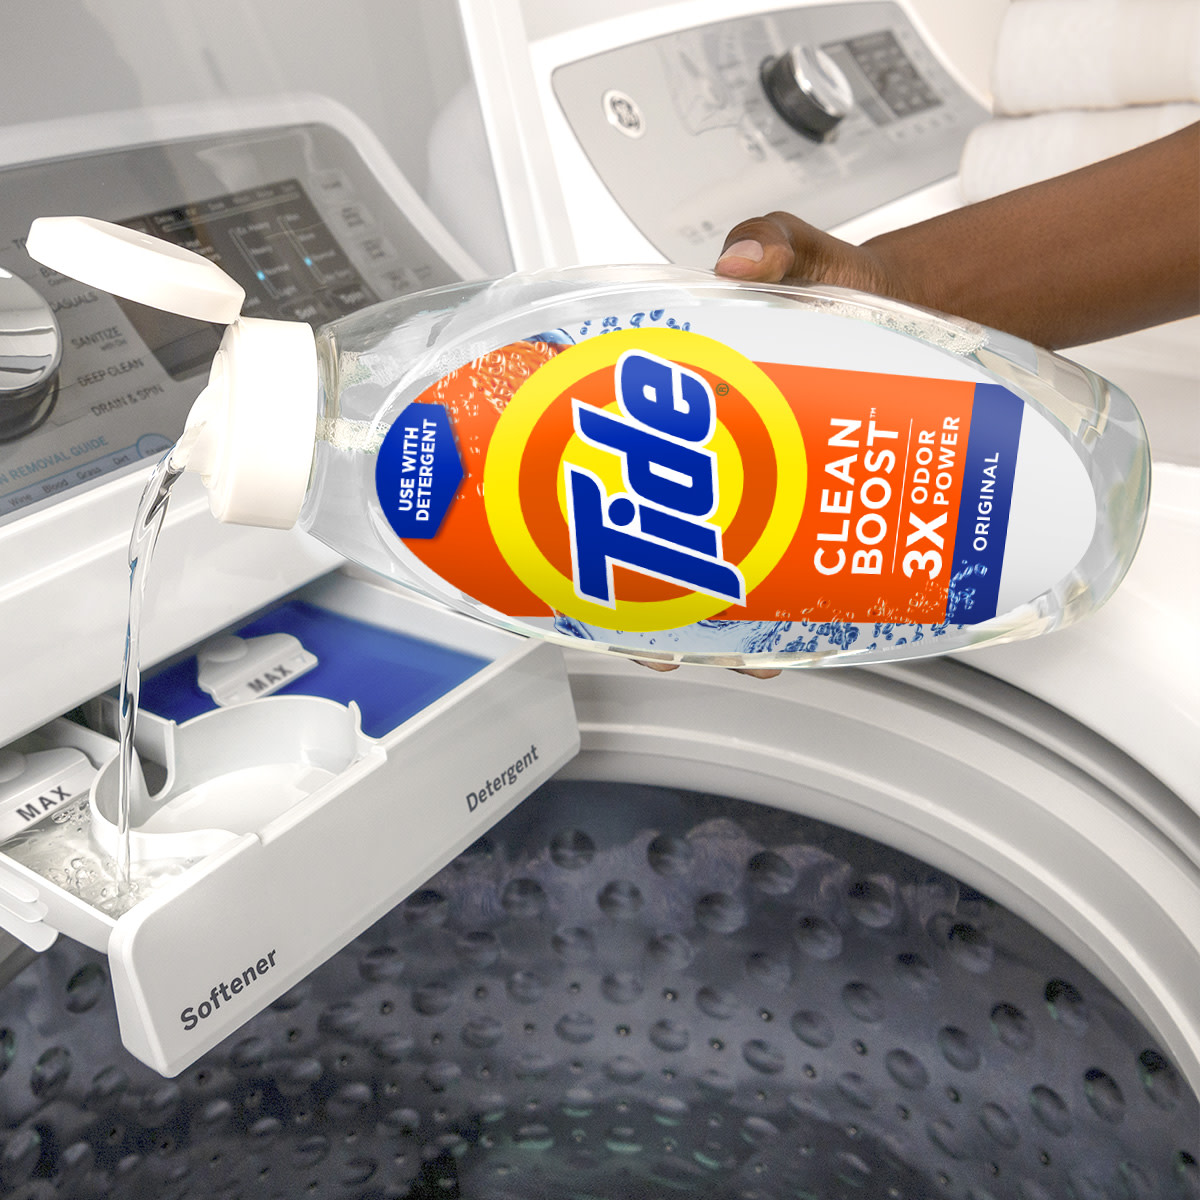 How to Use Tide Deep Cleansing Fabric Rinse